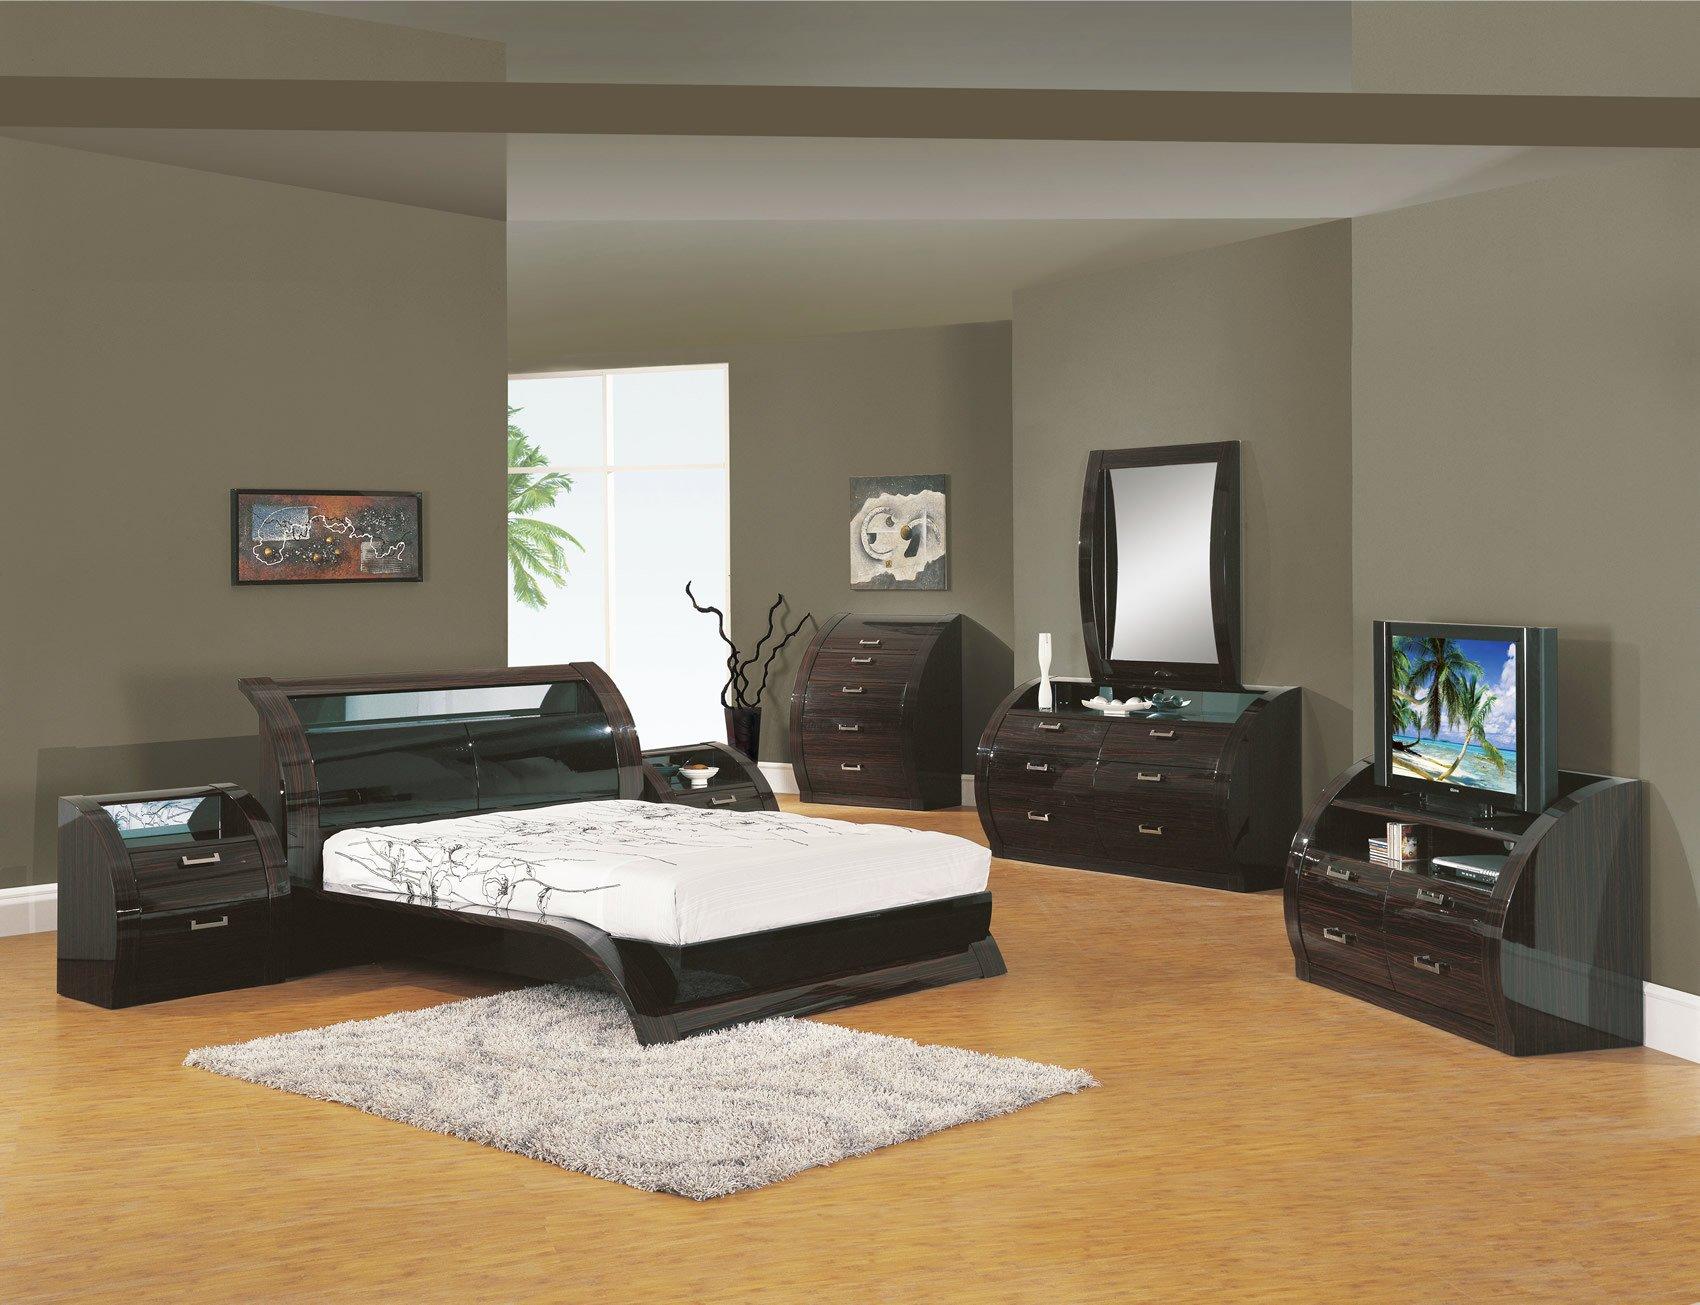 

    
Wenge Zebrano Lacquer Queen Bedroom Set 5Pcs Modern Madison Global United
